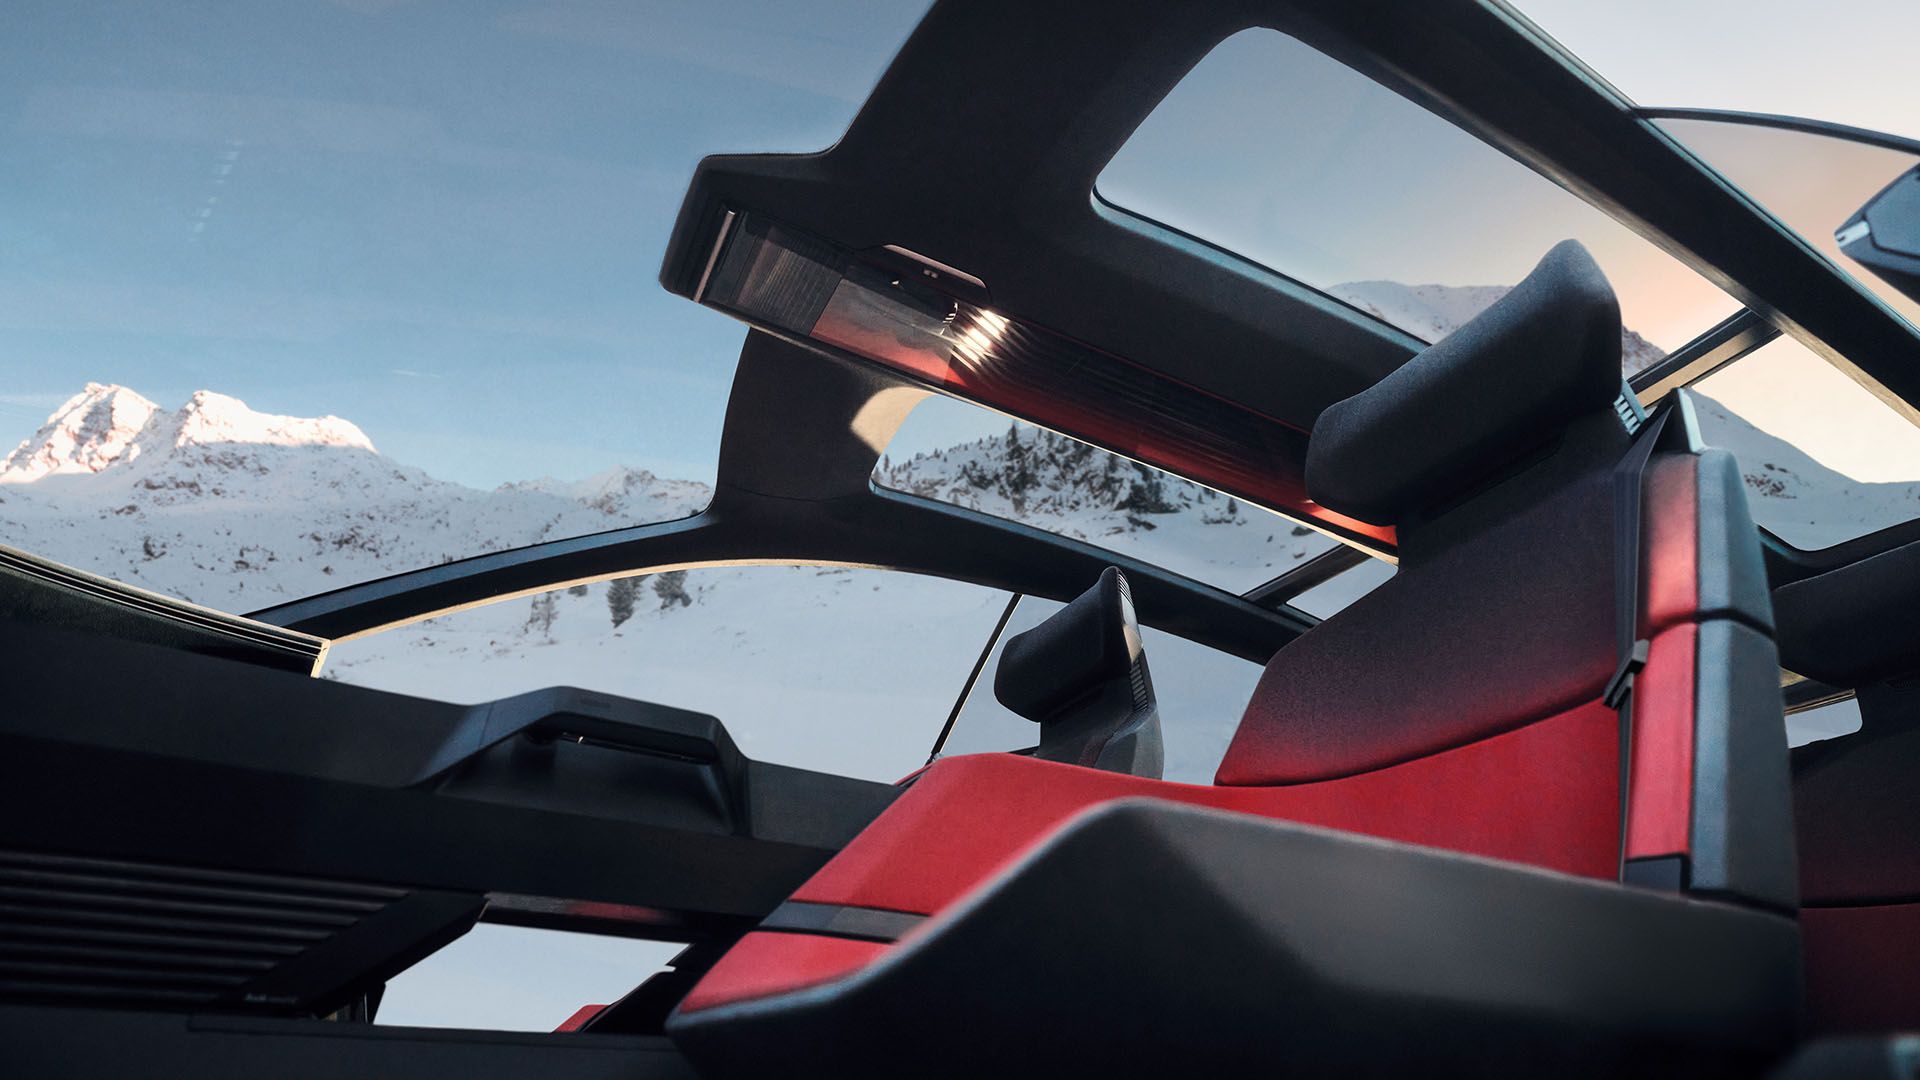 View of the interior of the Audi activesphere concept.